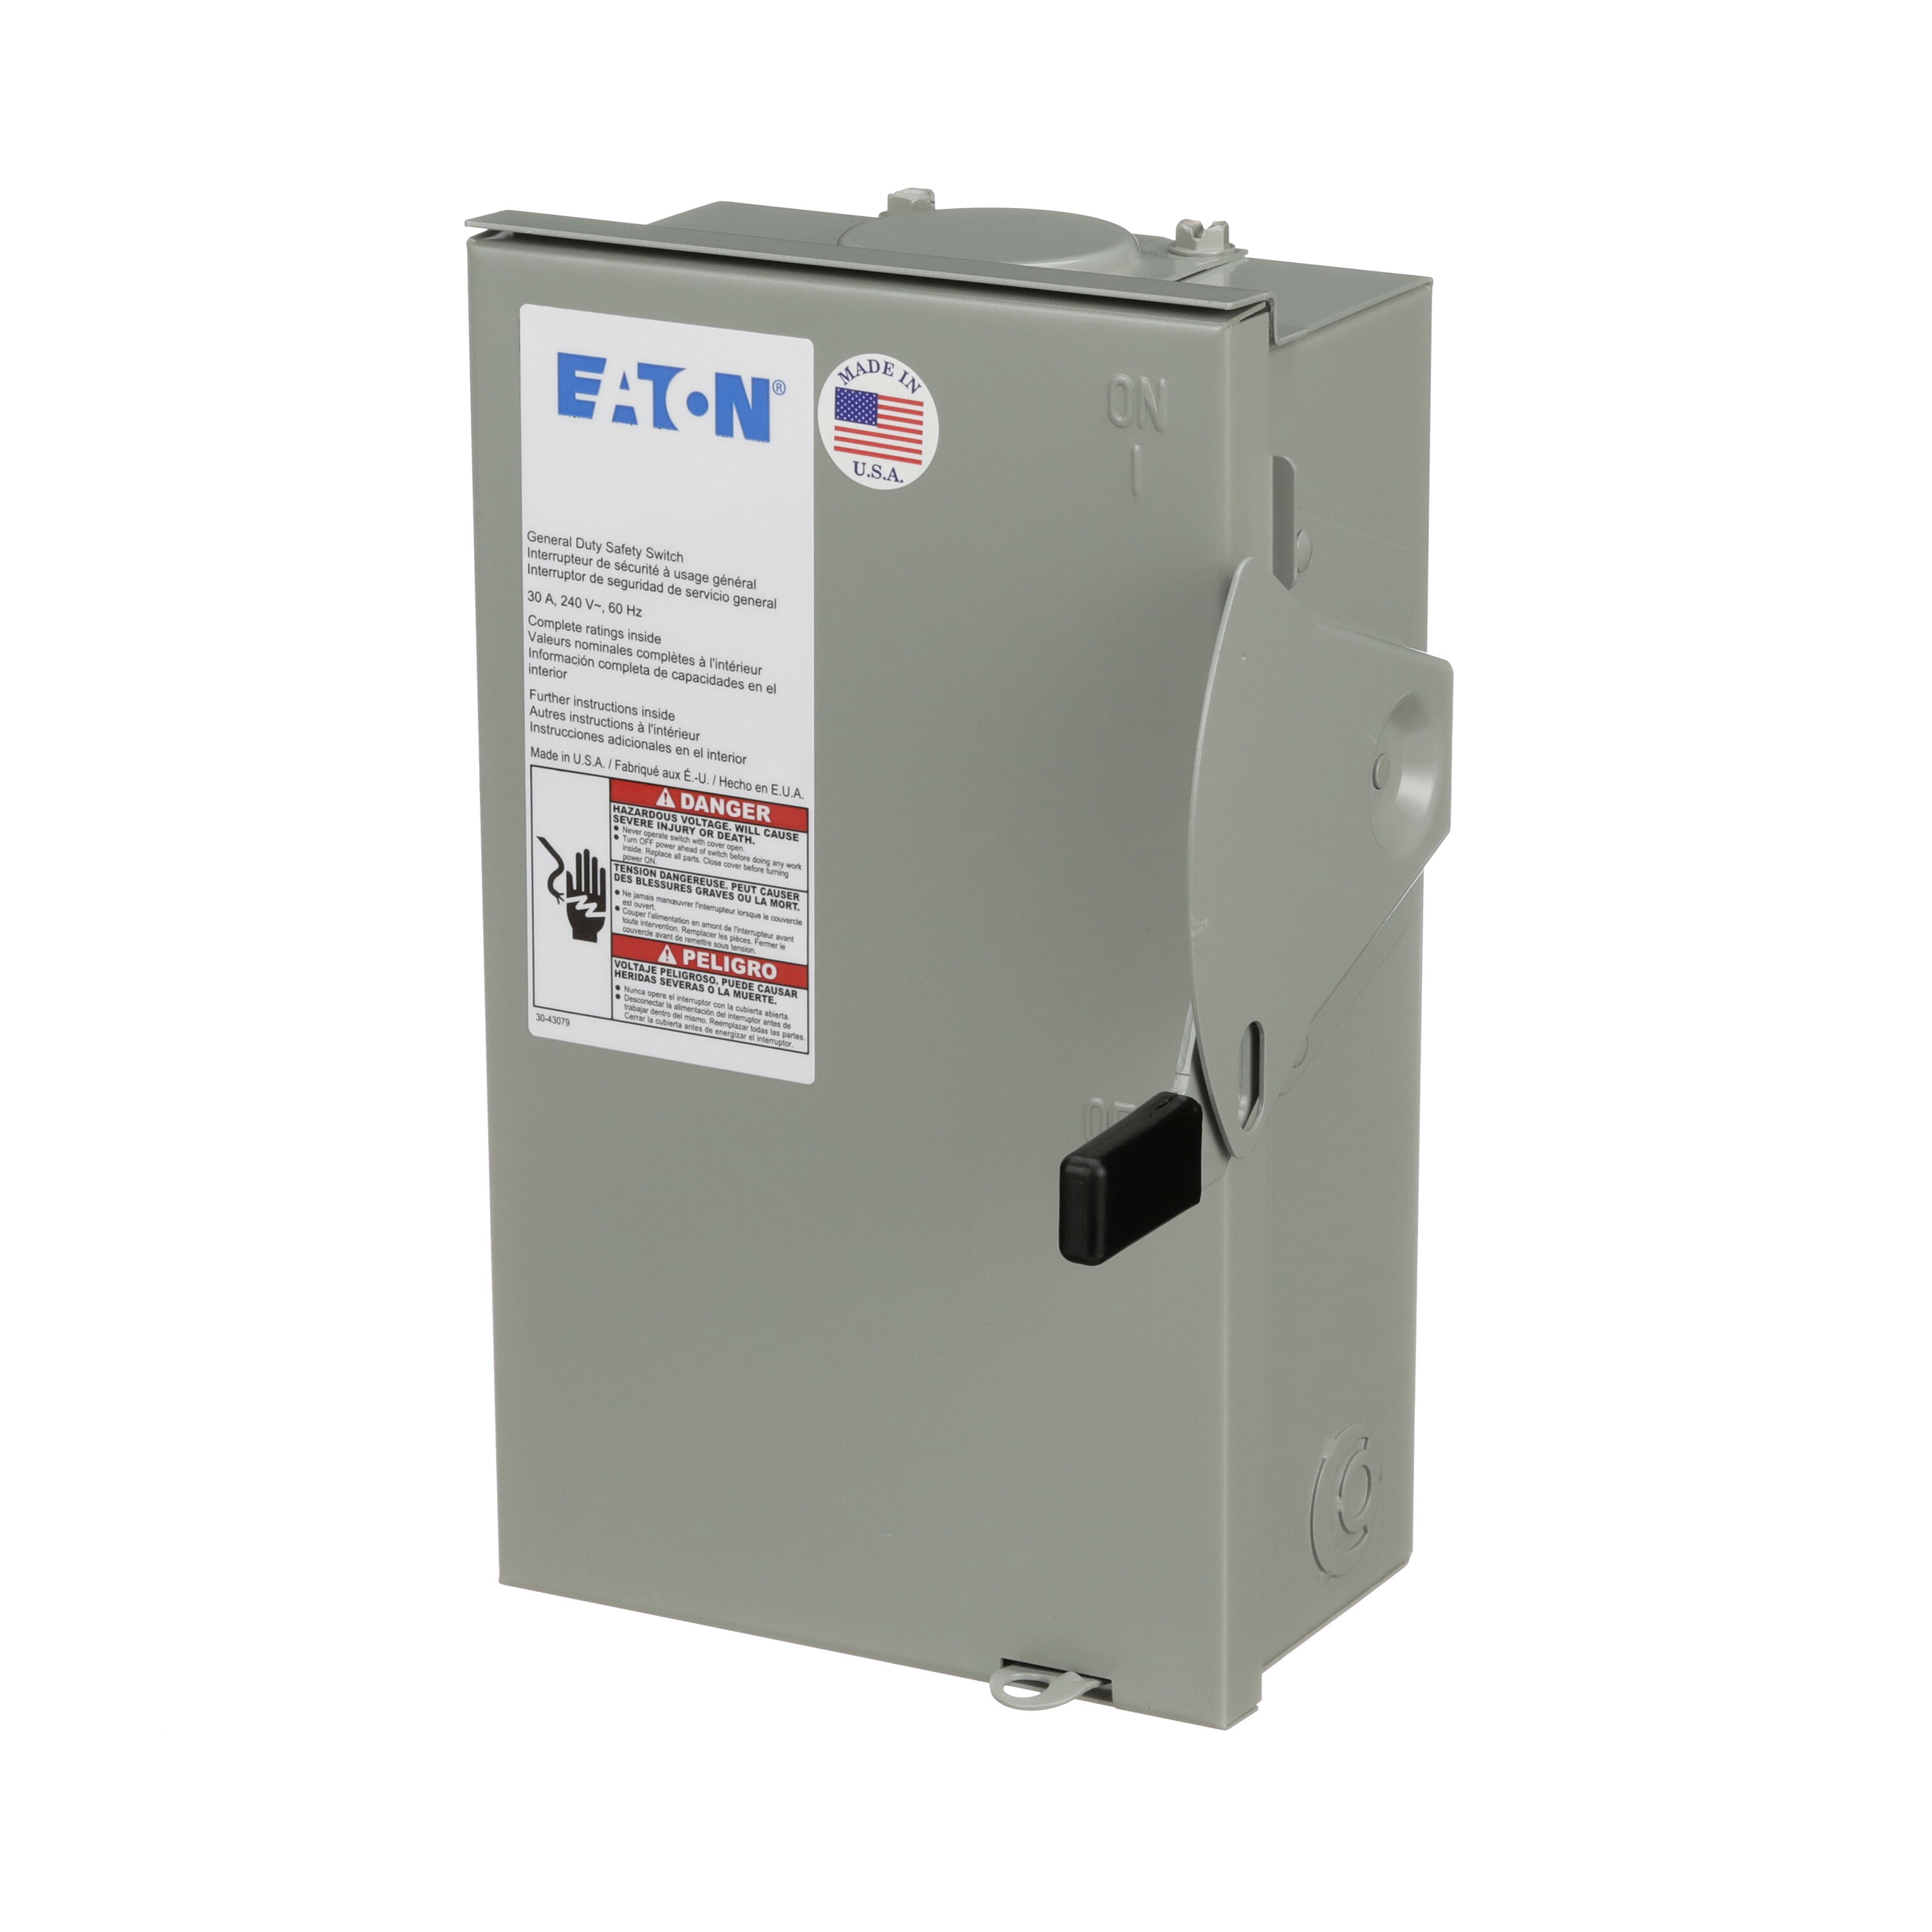 Eaton Corporation 30a Outdoor Safety Switch DG221NRB for sale online 